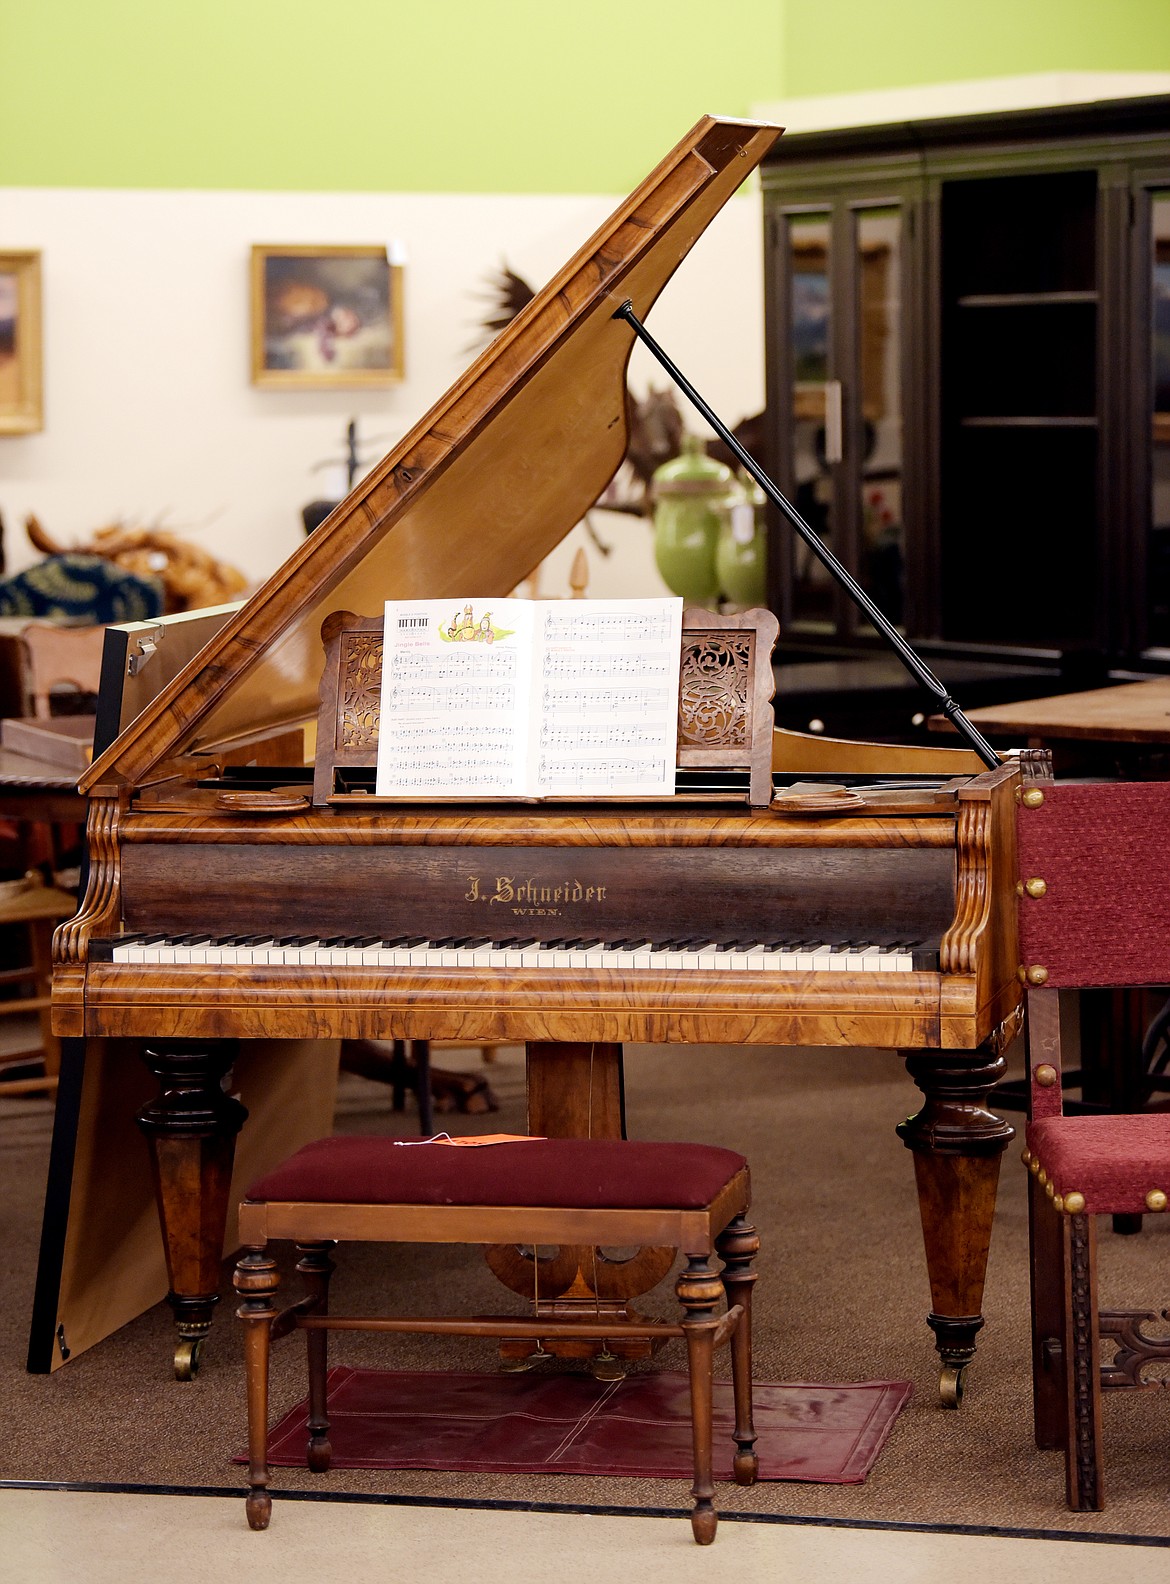 This grand piano is currently for sale at Home Consignment and Auctions in the store&#146;s new location in the former Shopko in Whitefish.